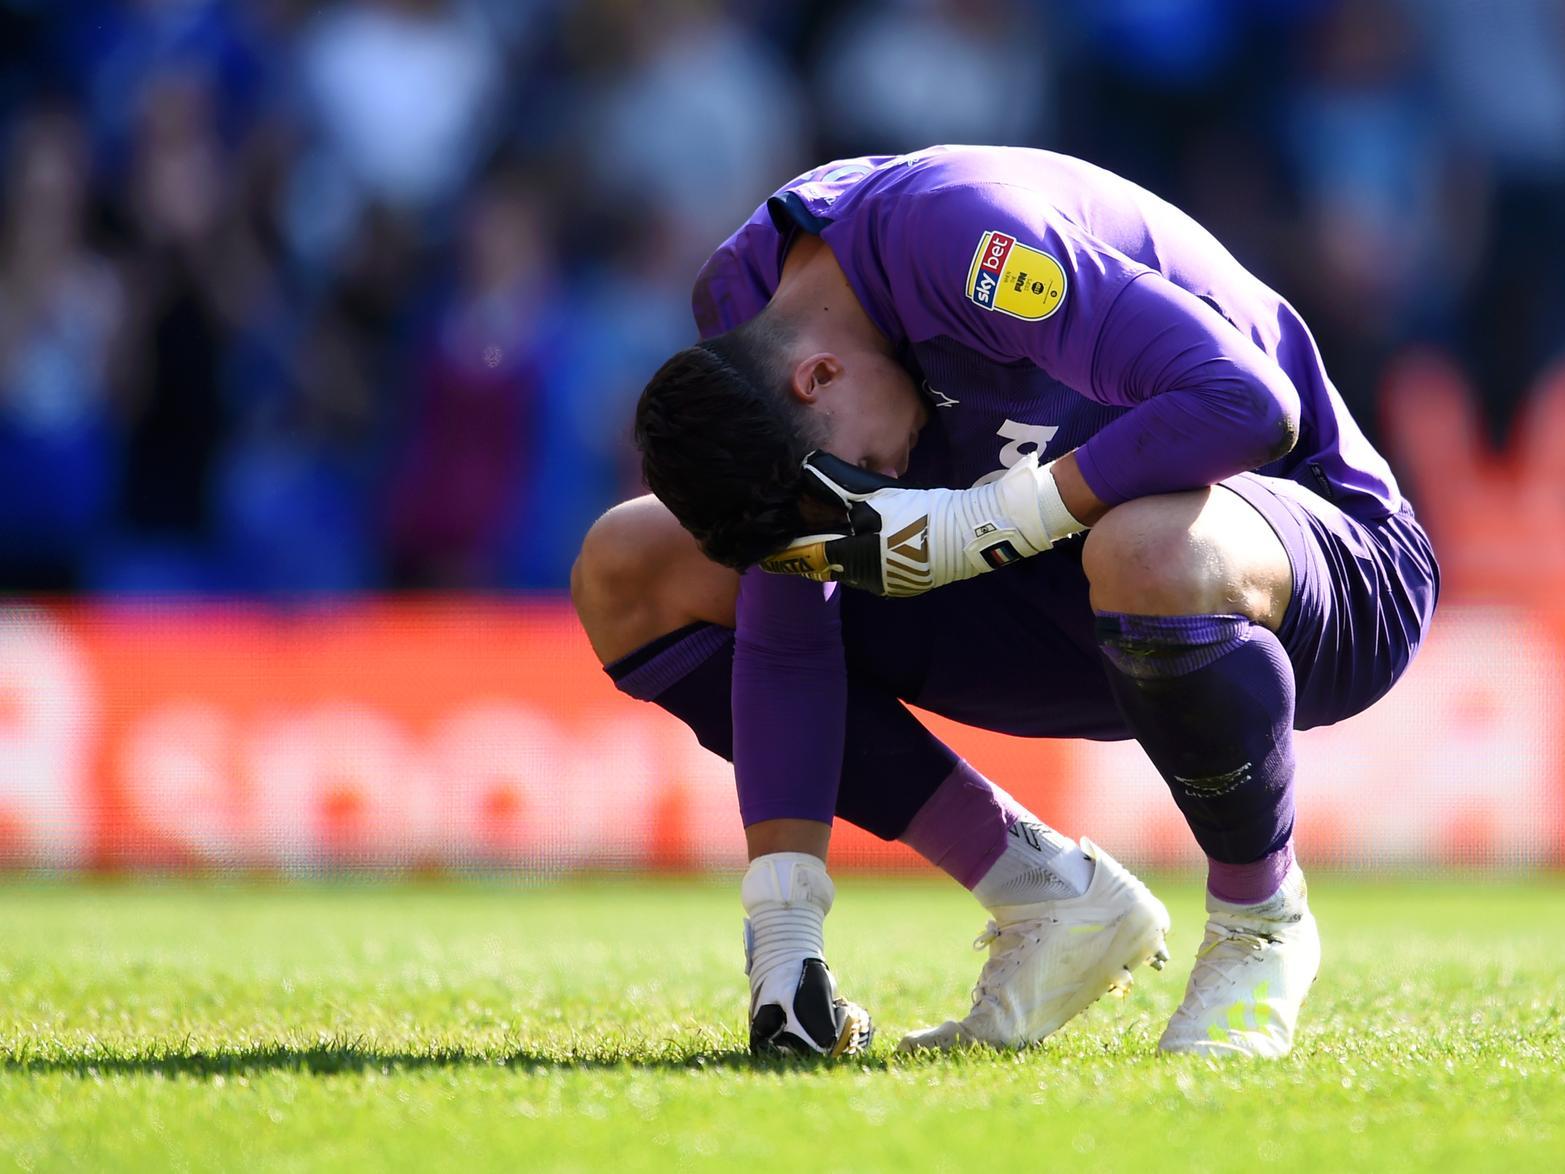 Derby County fans would really like to have Scott Carson back from his bizarre loan spell with Manchester City, as Roos was once again heavily criticised for his dire display, this time in a 3-0 loss to Fulham.